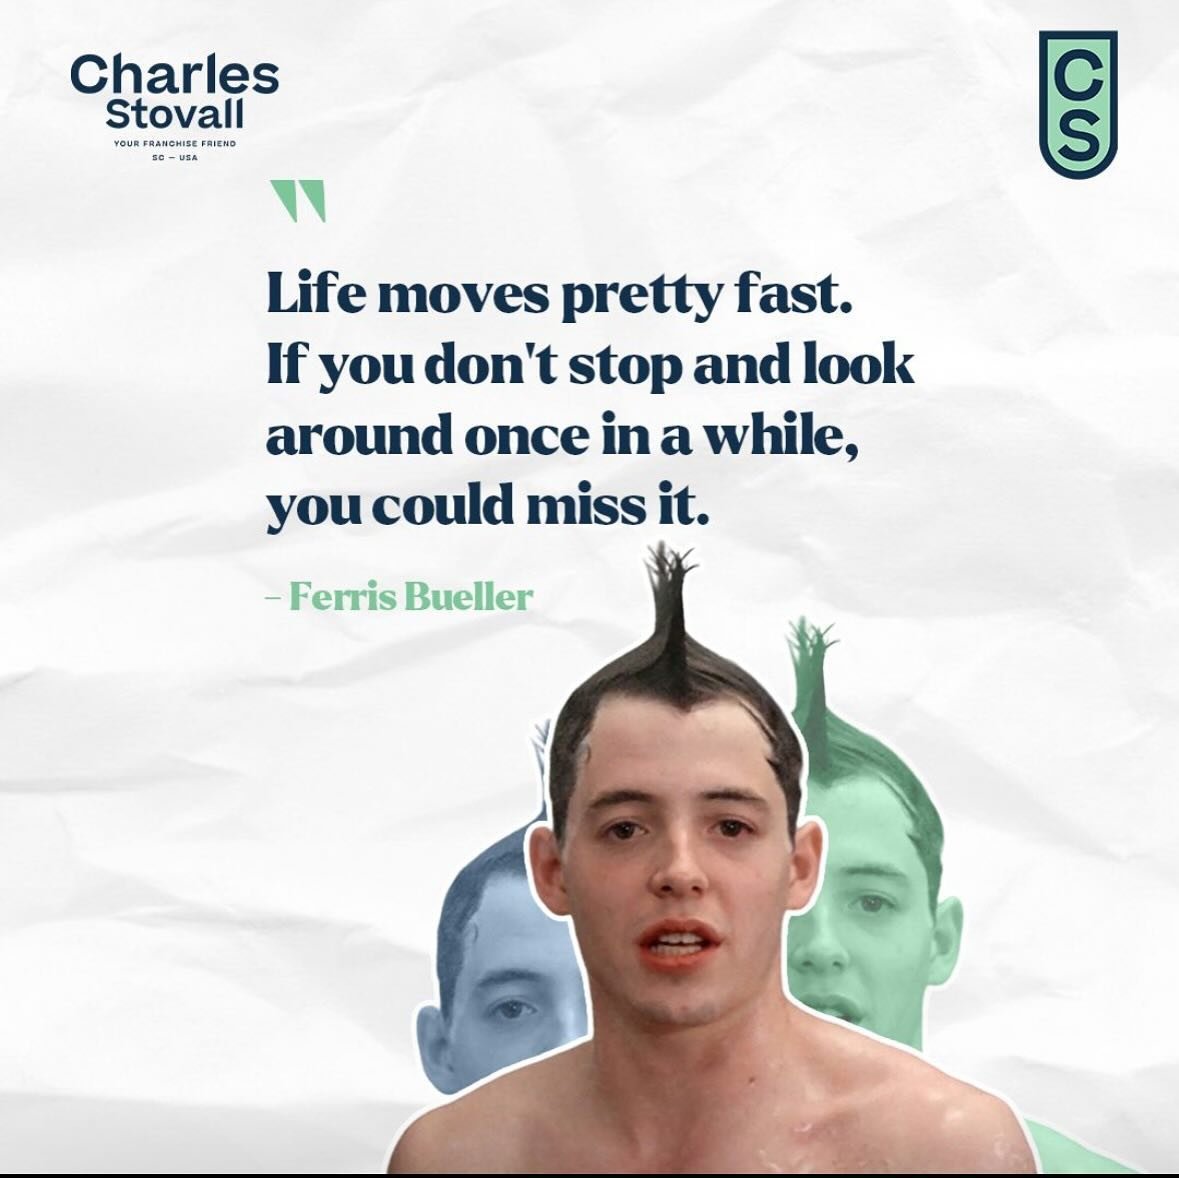 Ferris Bueller Was Onto Something: Don&rsquo;t Miss Out on Your Life!

Who remembers that iconic scene in Ferris Bueller&rsquo;s Day Off where he&rsquo;s rocking a questionable shower-made mohawk?  Let&rsquo;s be honest, we&rsquo;ve all attempted som